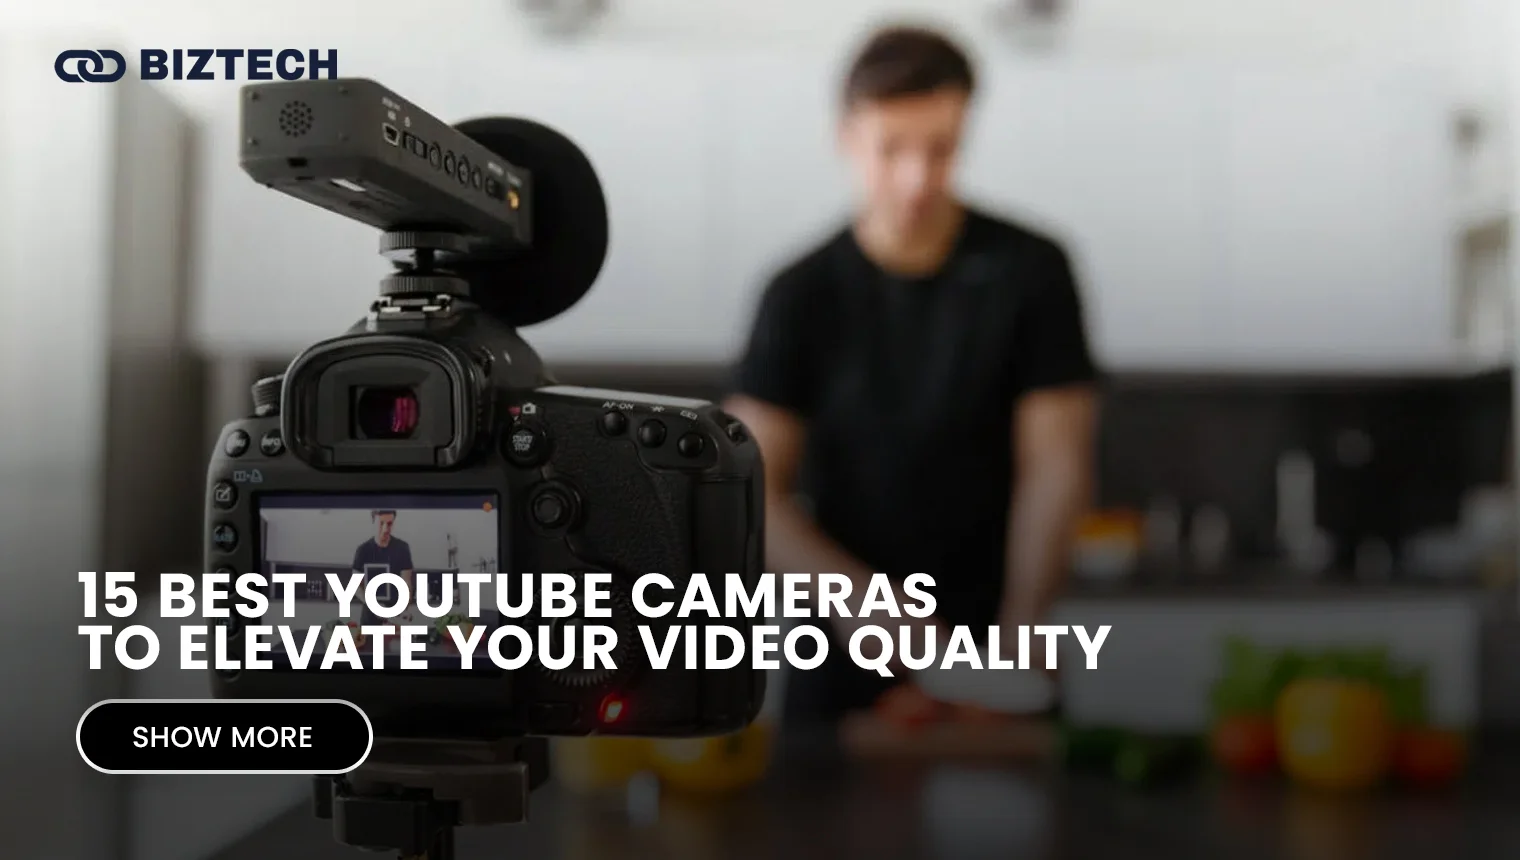 15 Best YouTube Cameras to Elevate Your Video Quality